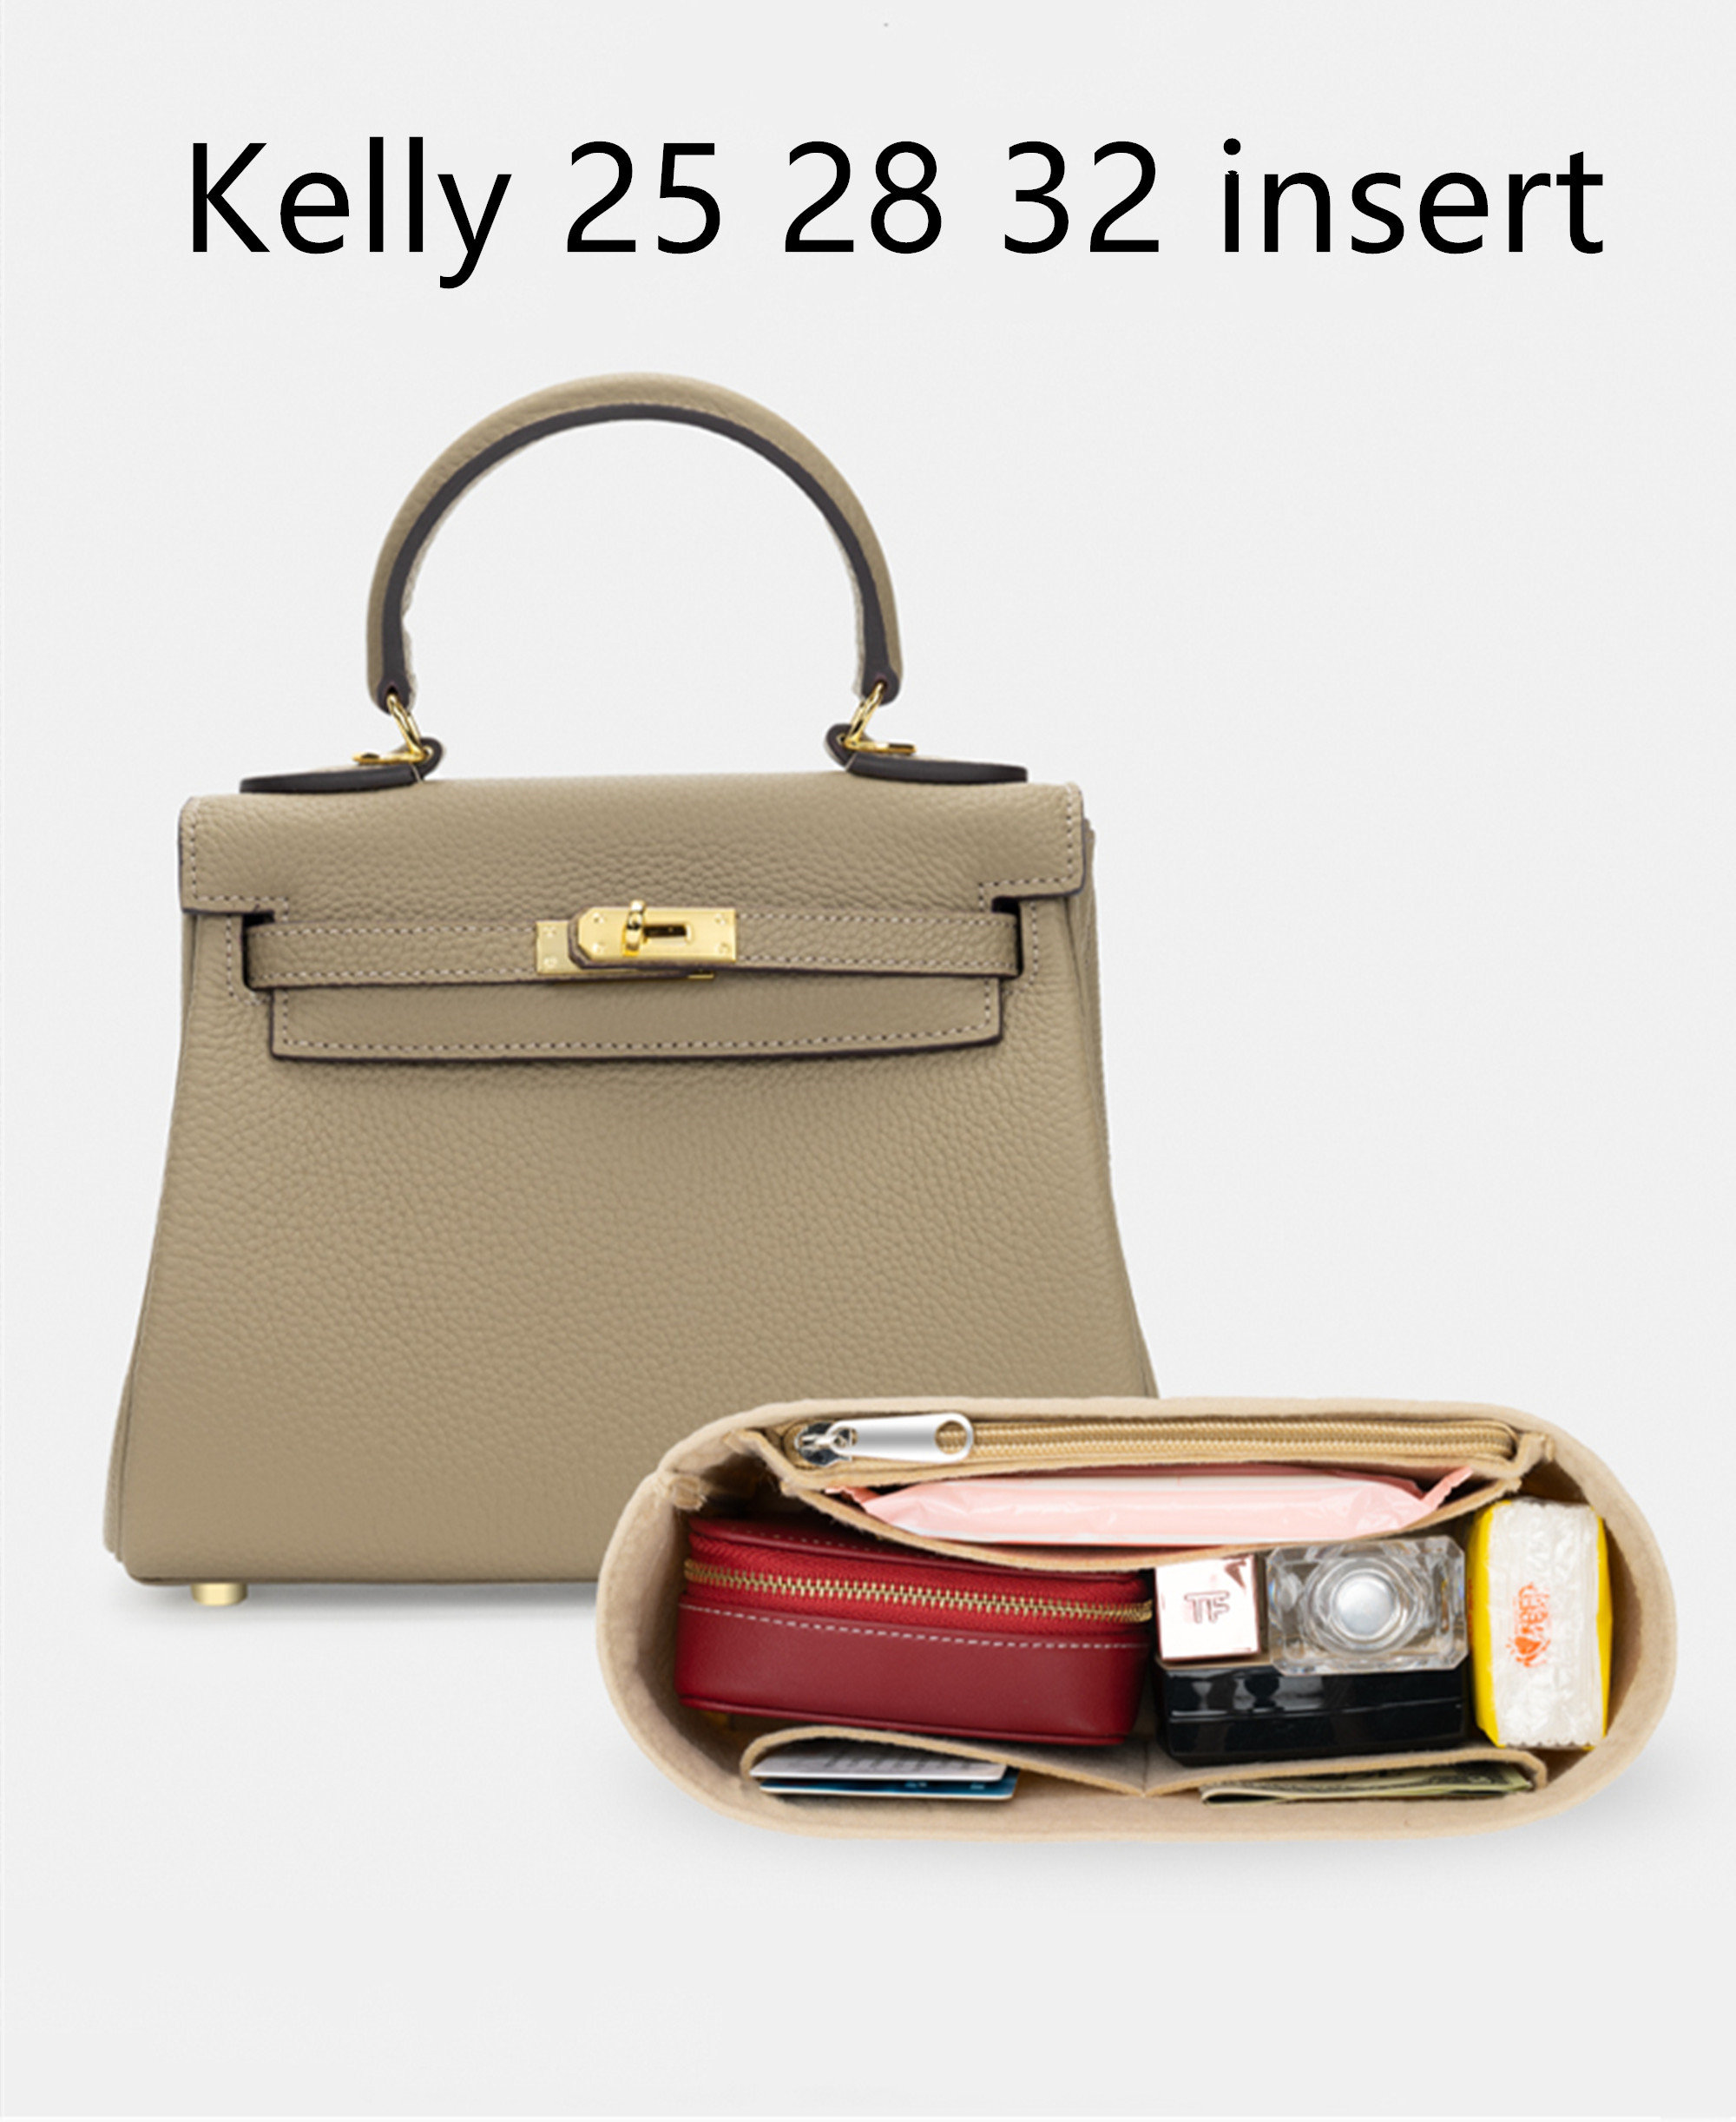  ZYZii Silk Purse Organizer for Kelly Pochette/Mini2/20/25/28/32/35/40,Insert  Bag in Bag,Luxury Handbag Tote Lining Bag Shapers(Kelly40,Champagne) :  Clothing, Shoes & Jewelry